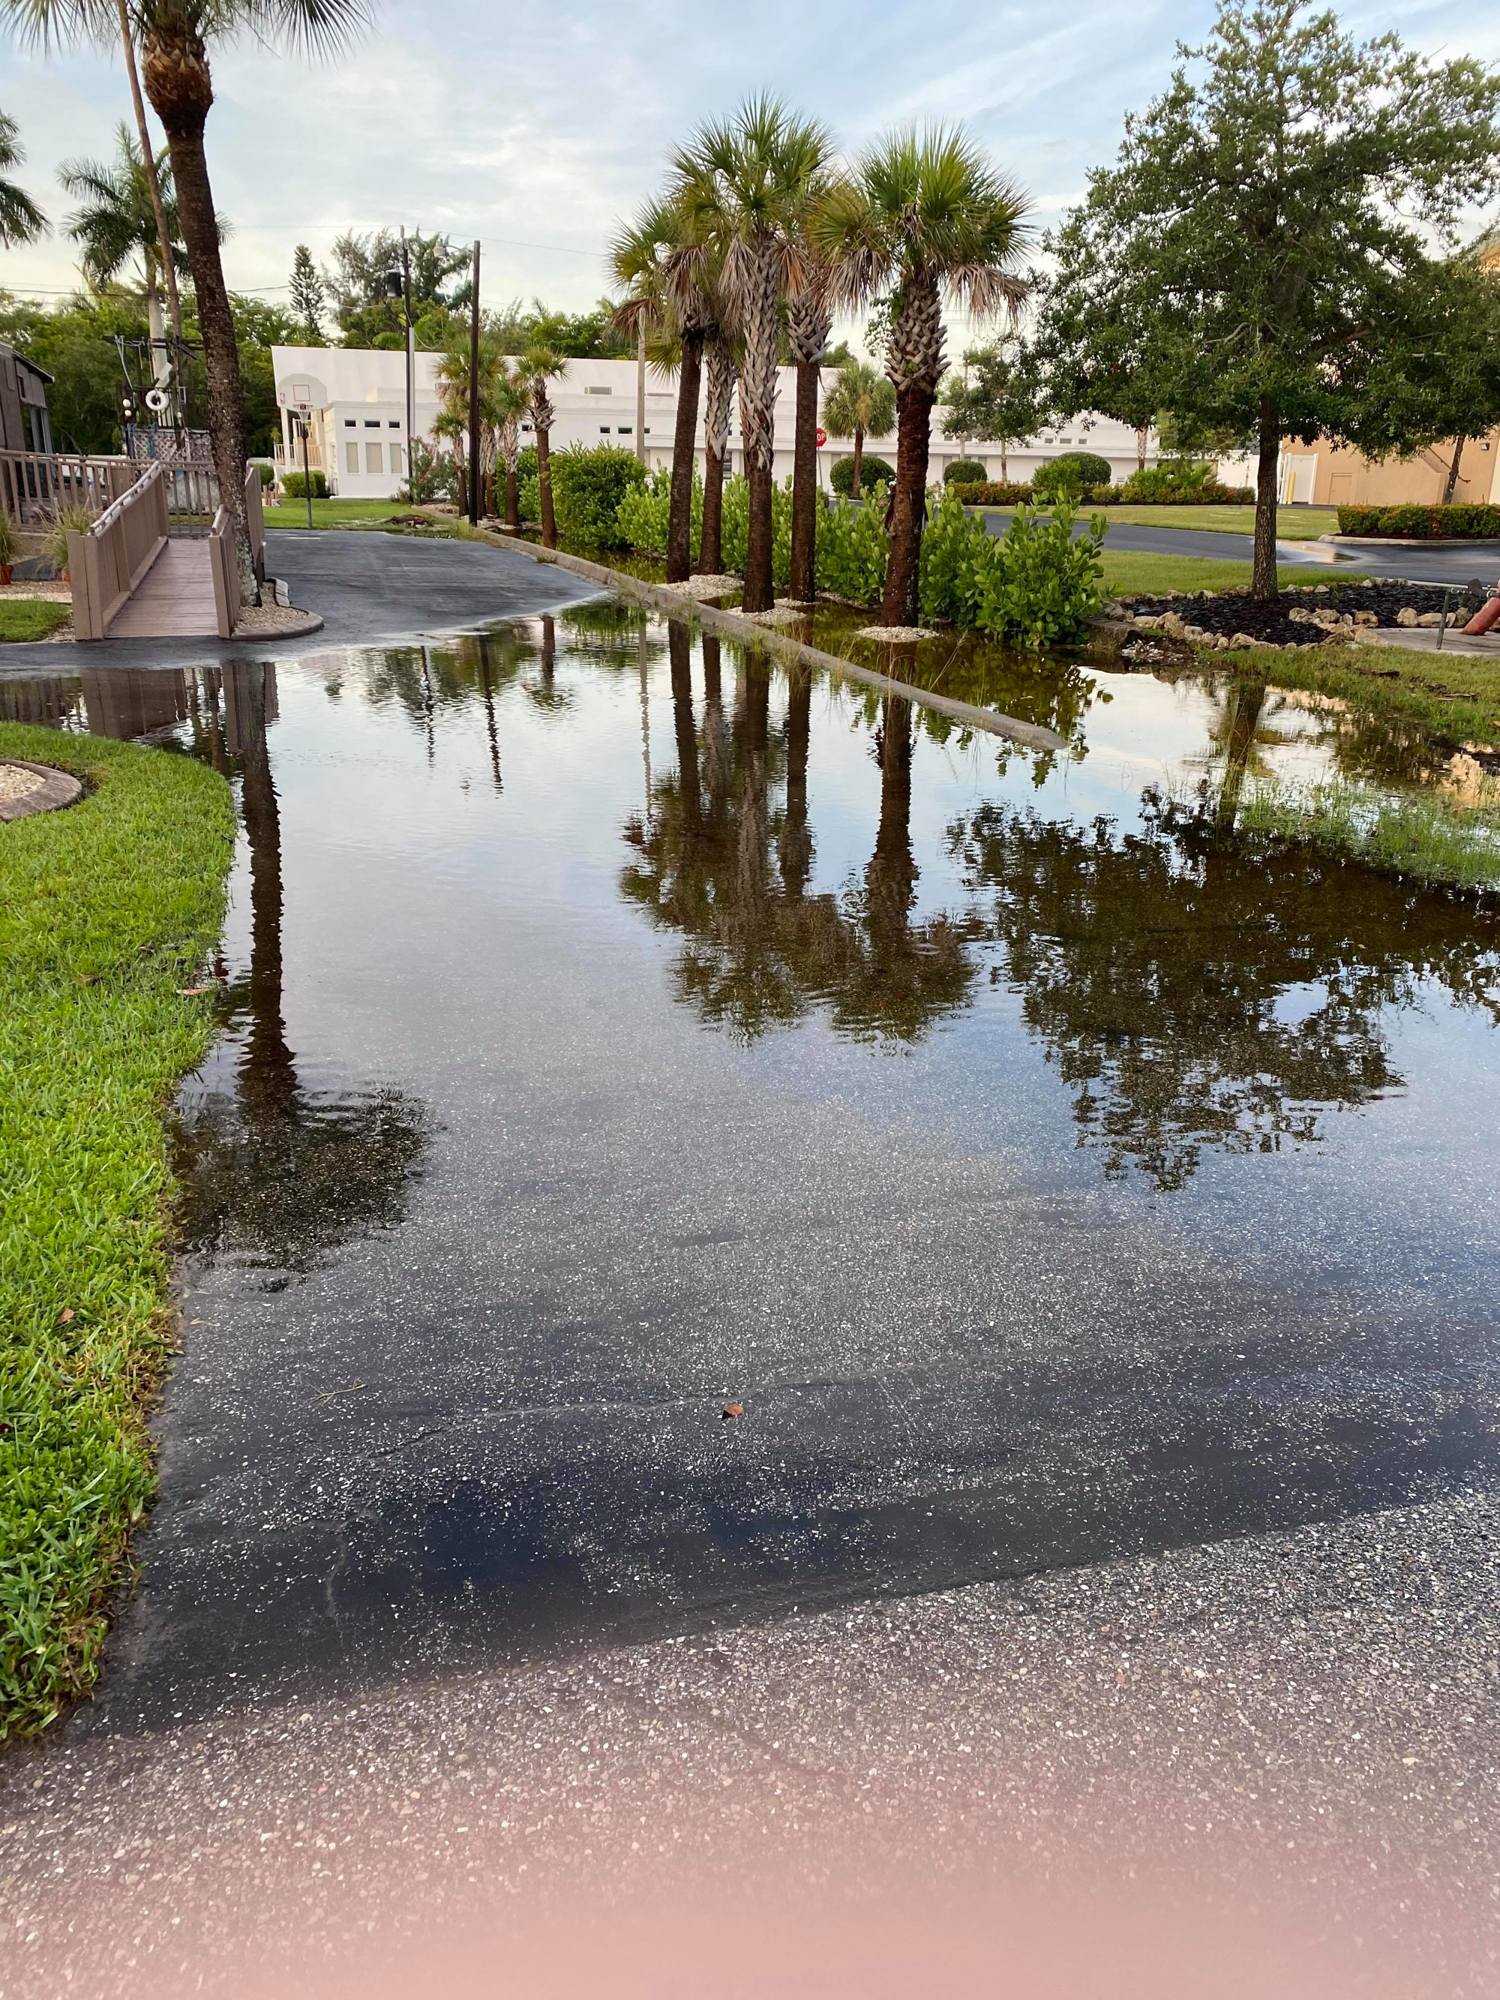 The bioswale between Ross Toussaint's property and Christ Church of Longboat Key was filled with stormwater runoff on July 25. It overflowed onto Toussaint's property. Photo Credit: Ross Toussaint